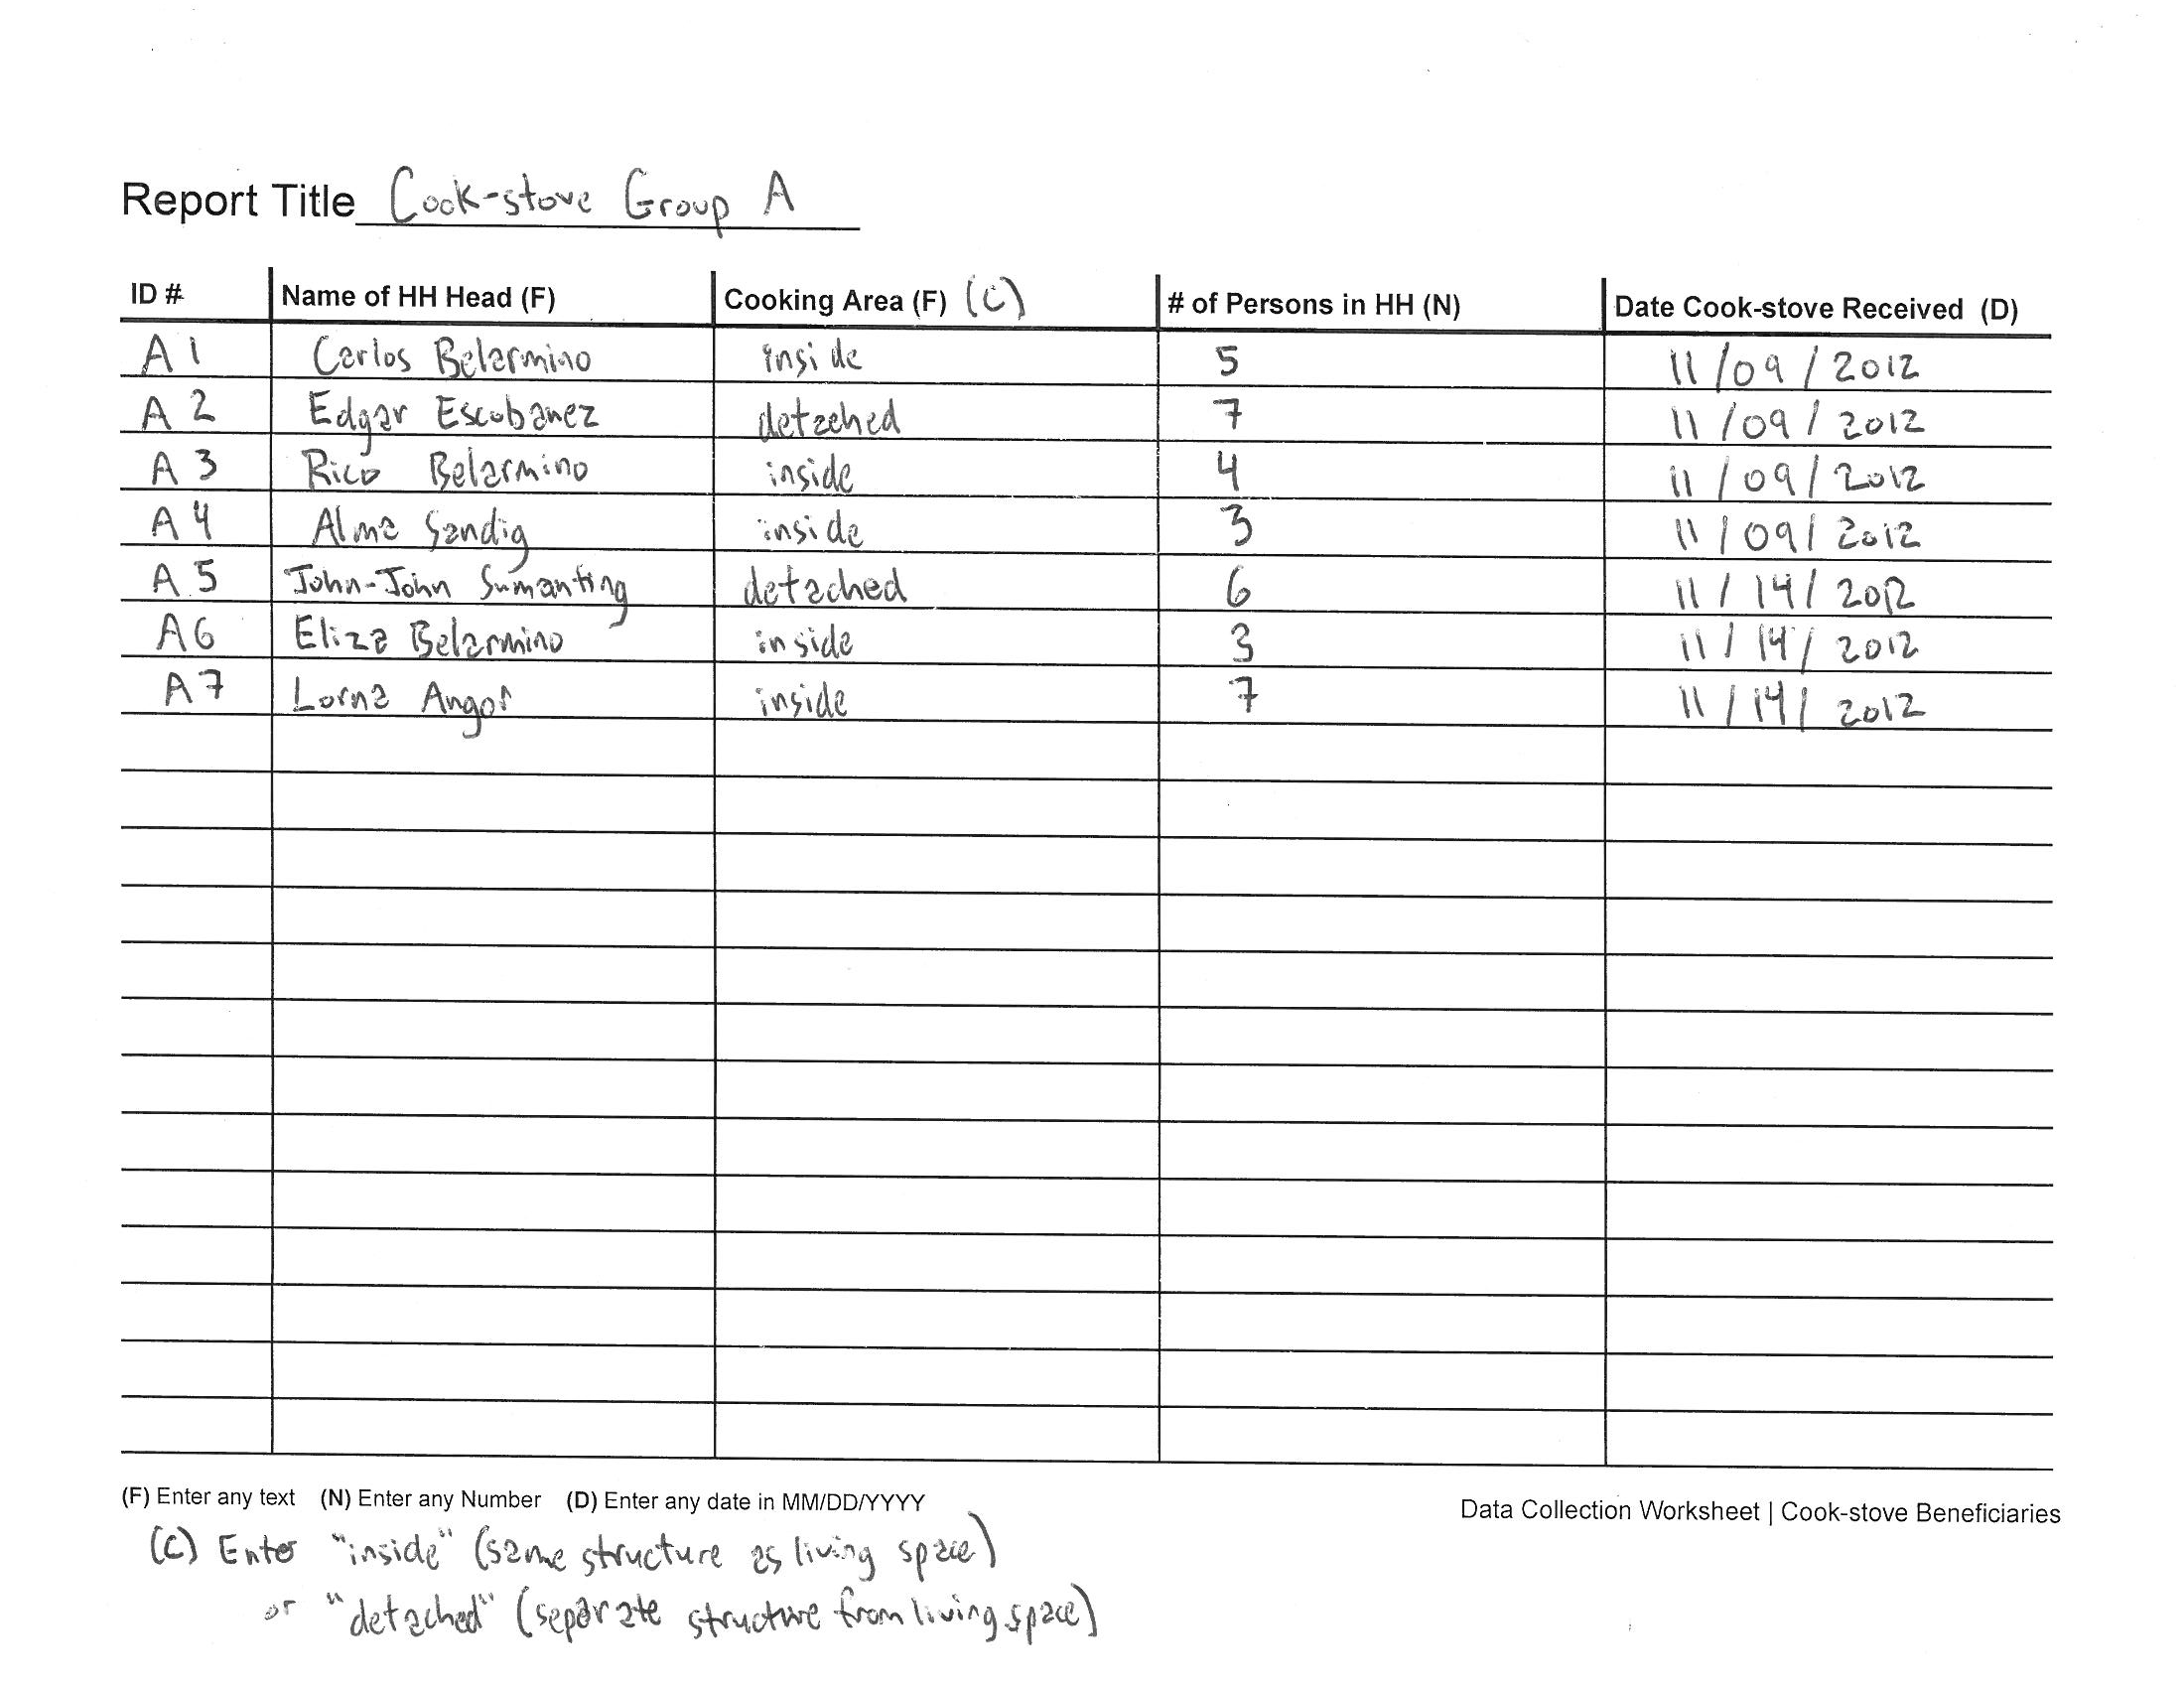 Example Data Collection Worksheet